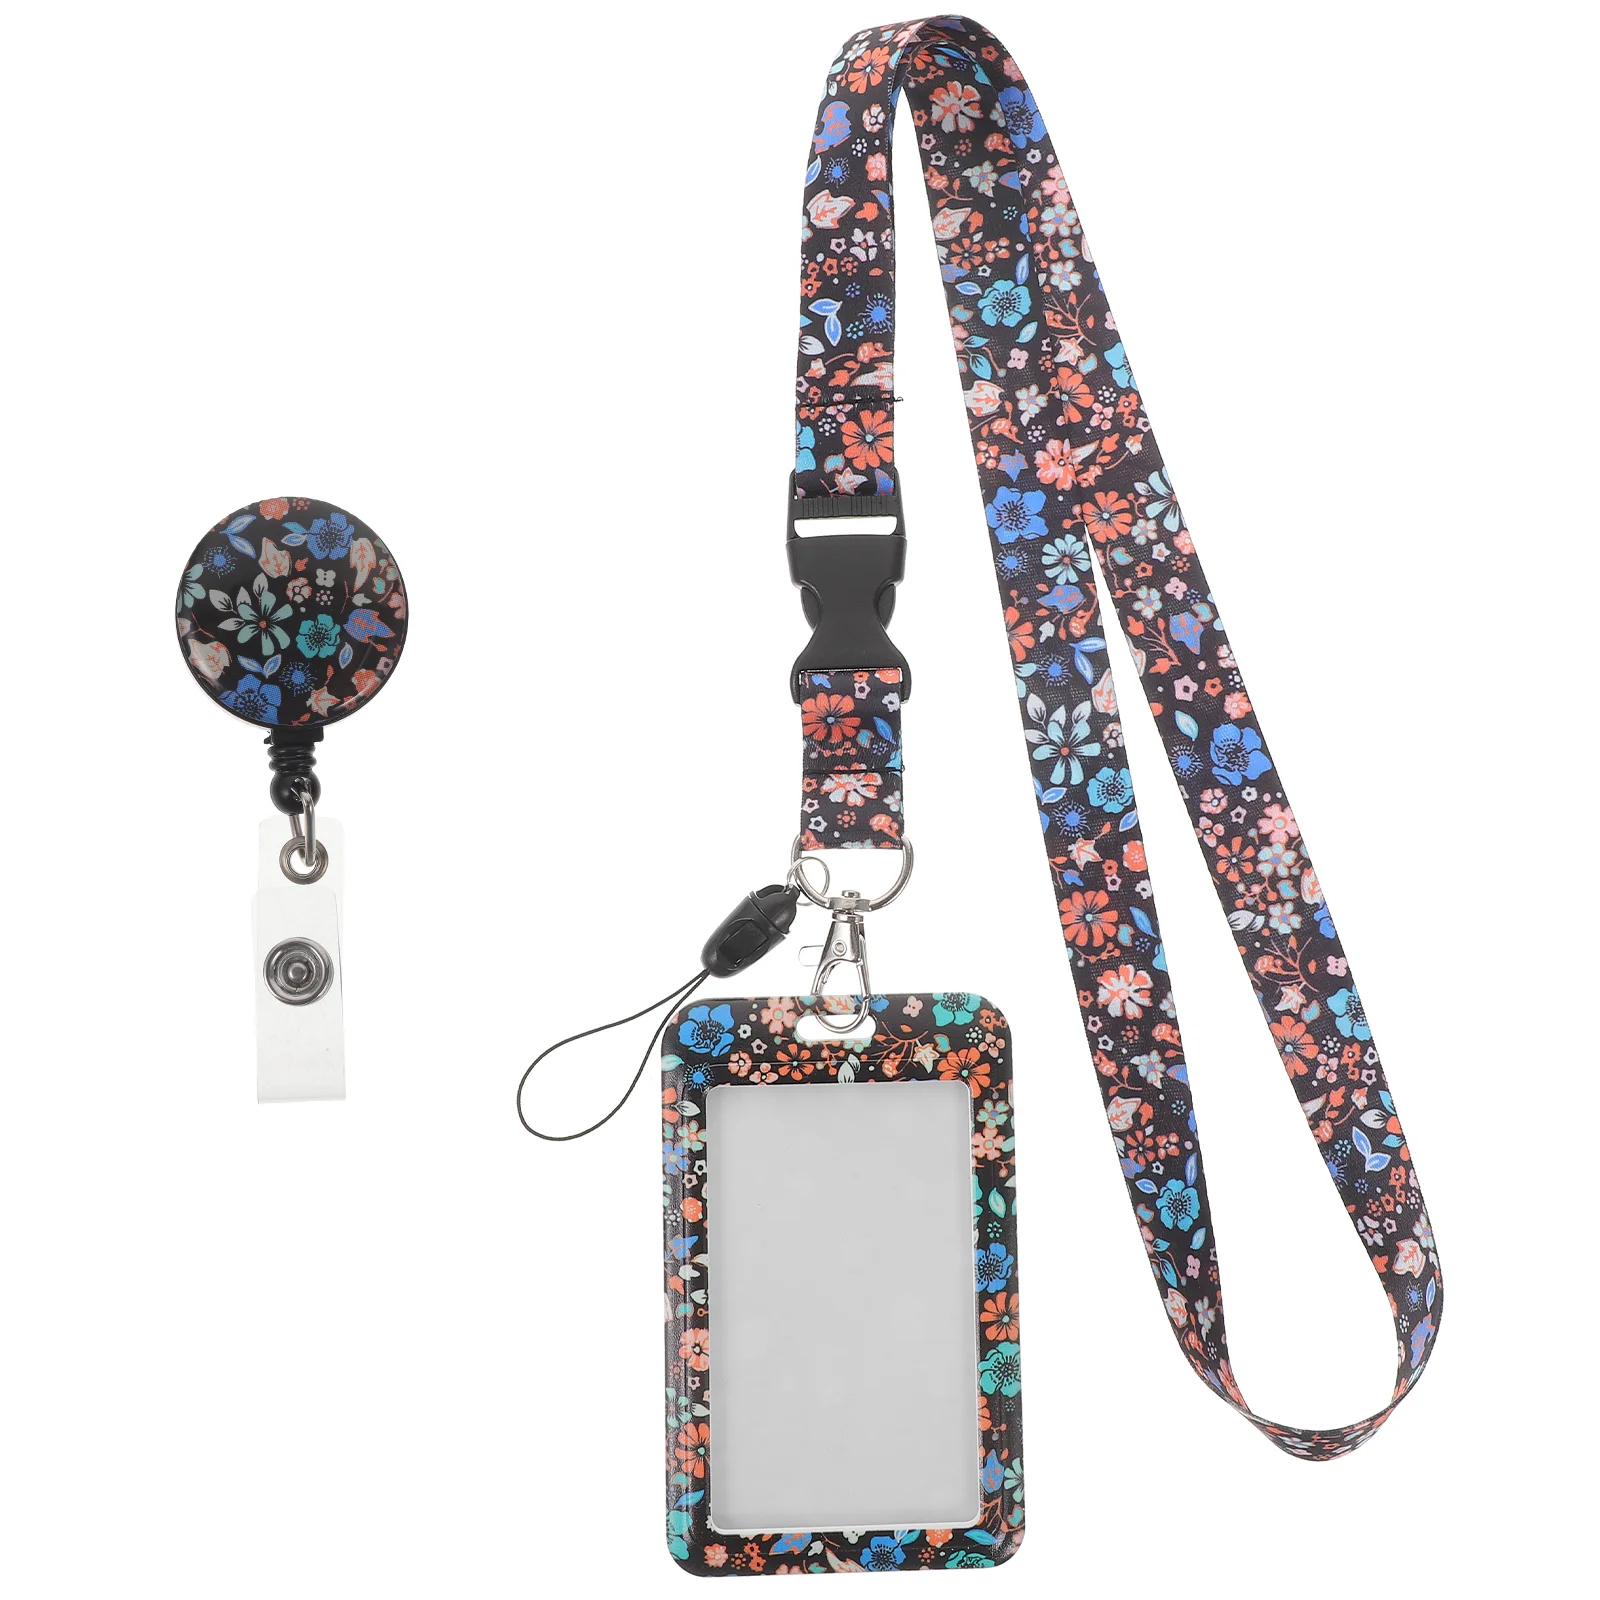 

1 Set of Chic Flower Tag Sleeve Badge Lanyards Portable Id Cards Holder with Lanyard Portable Card Holder